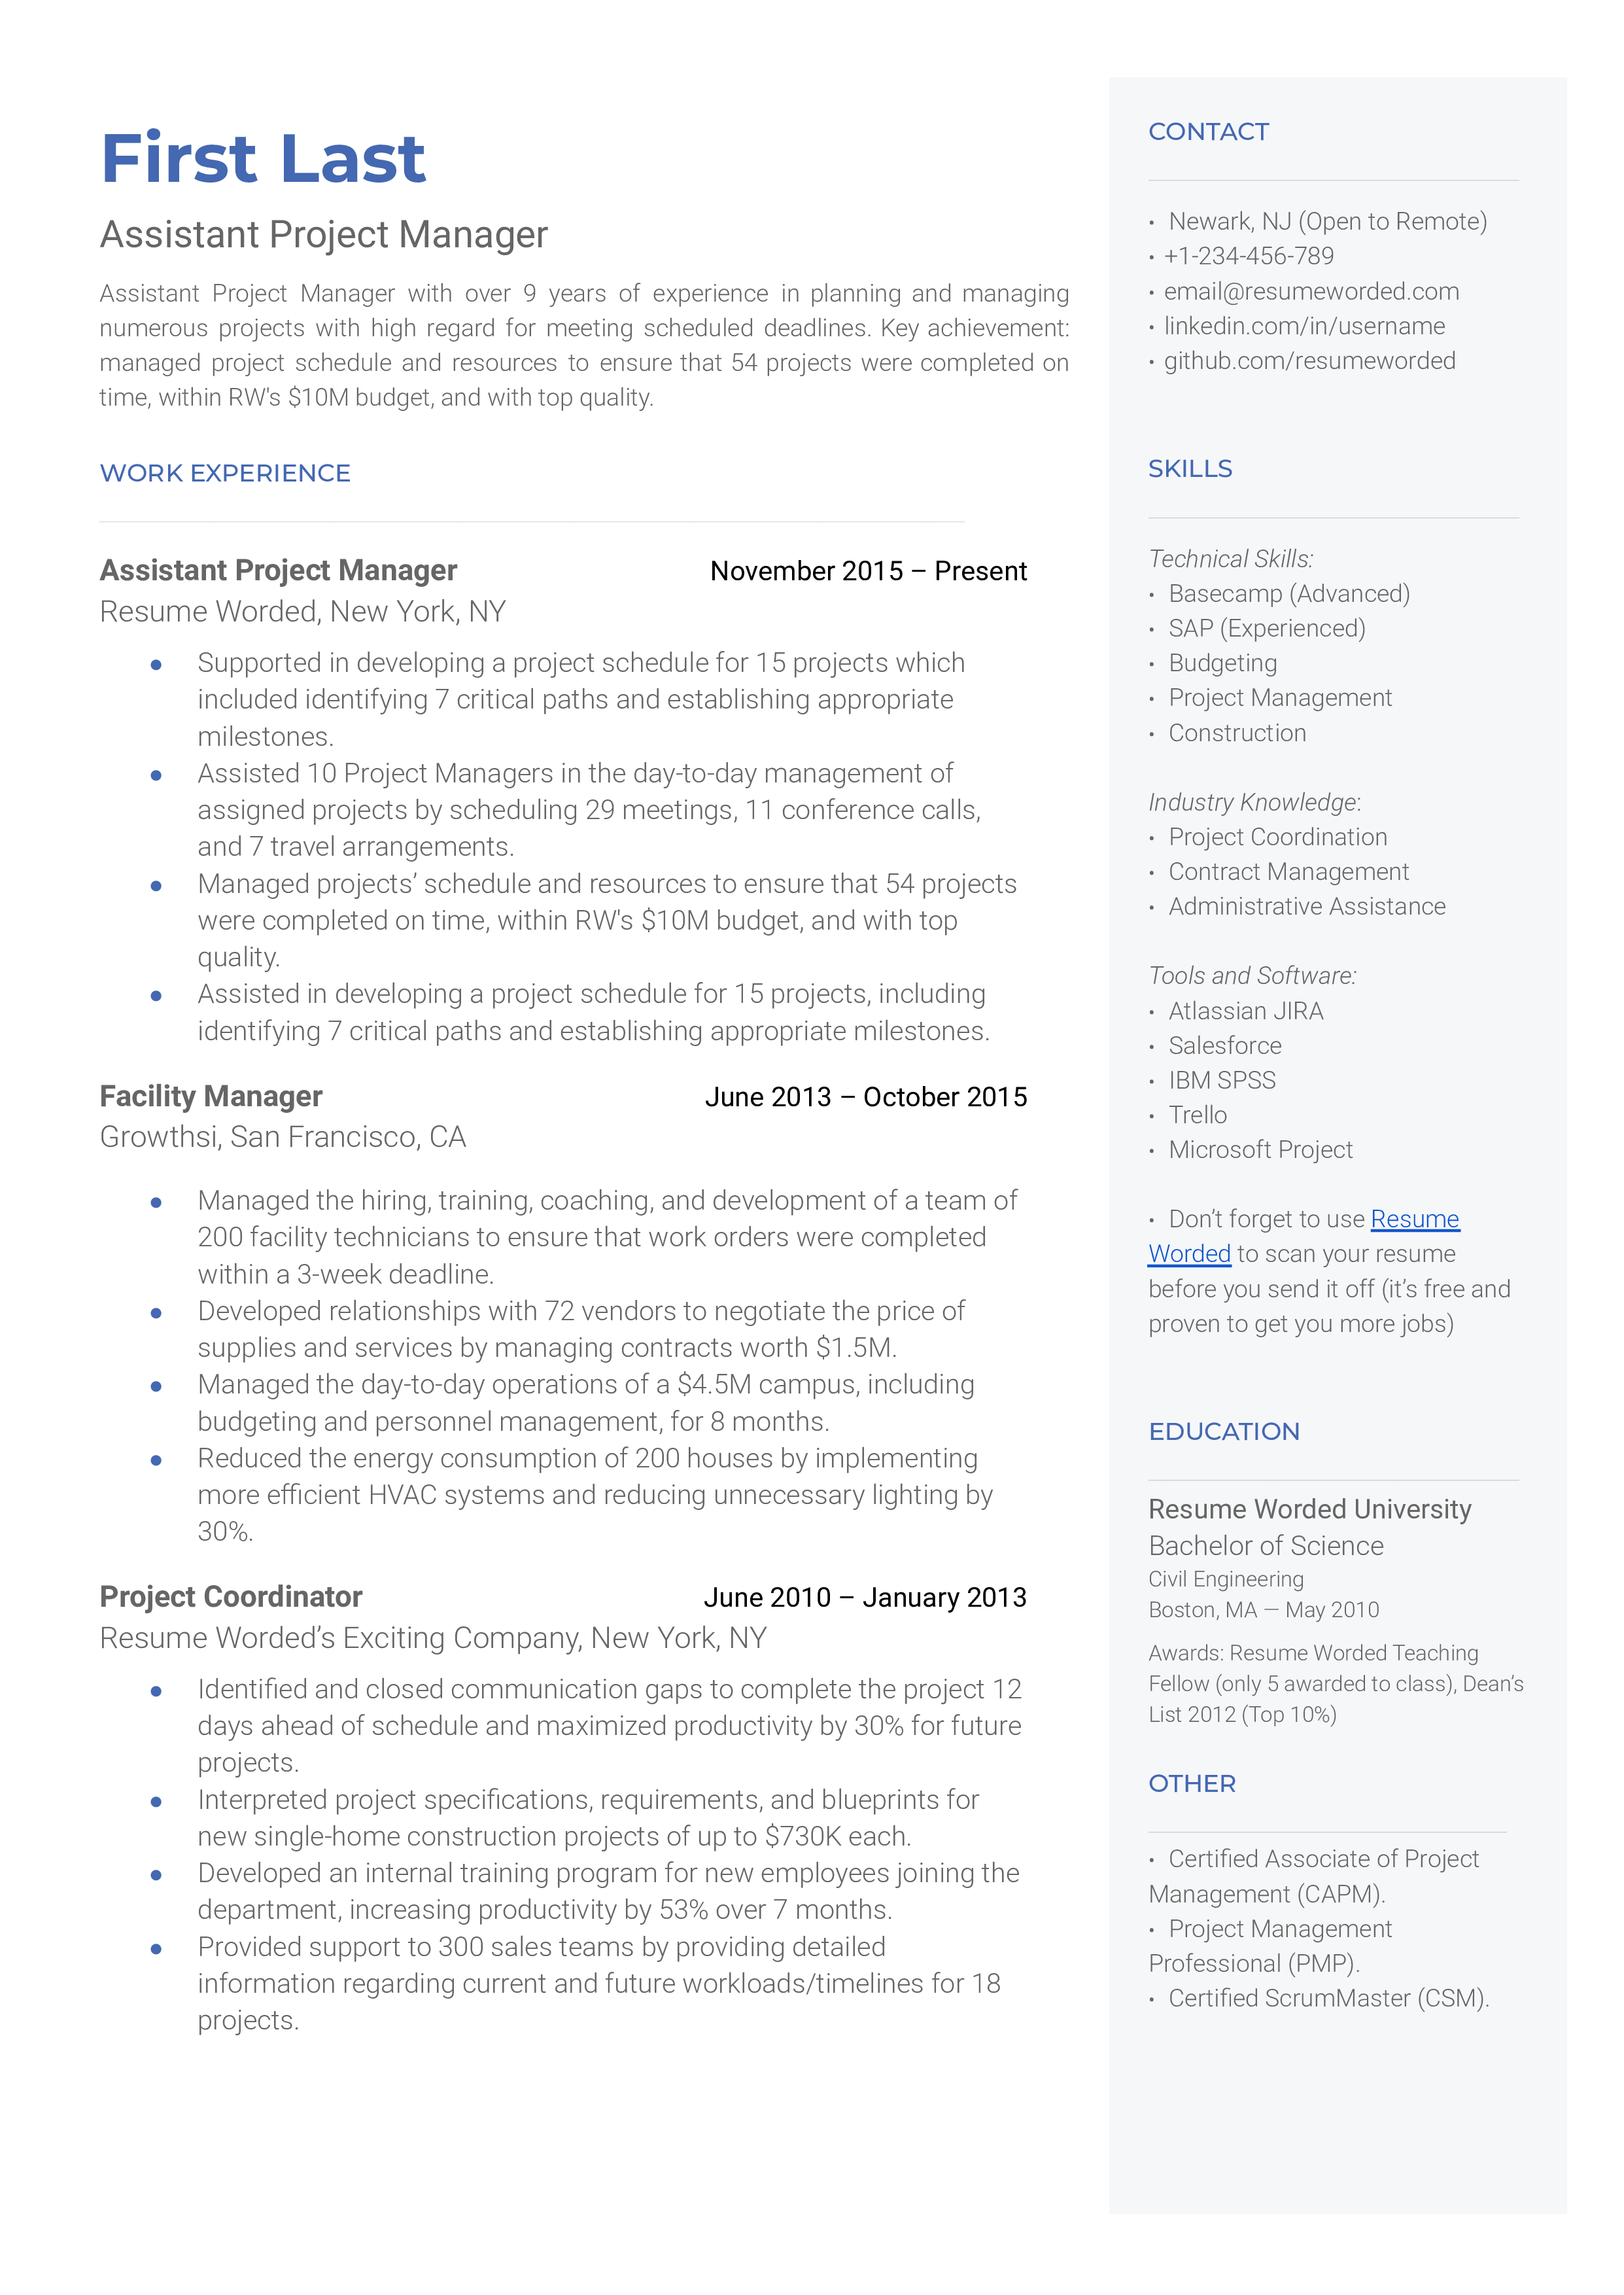 Assistant Project Manager Resume Sample